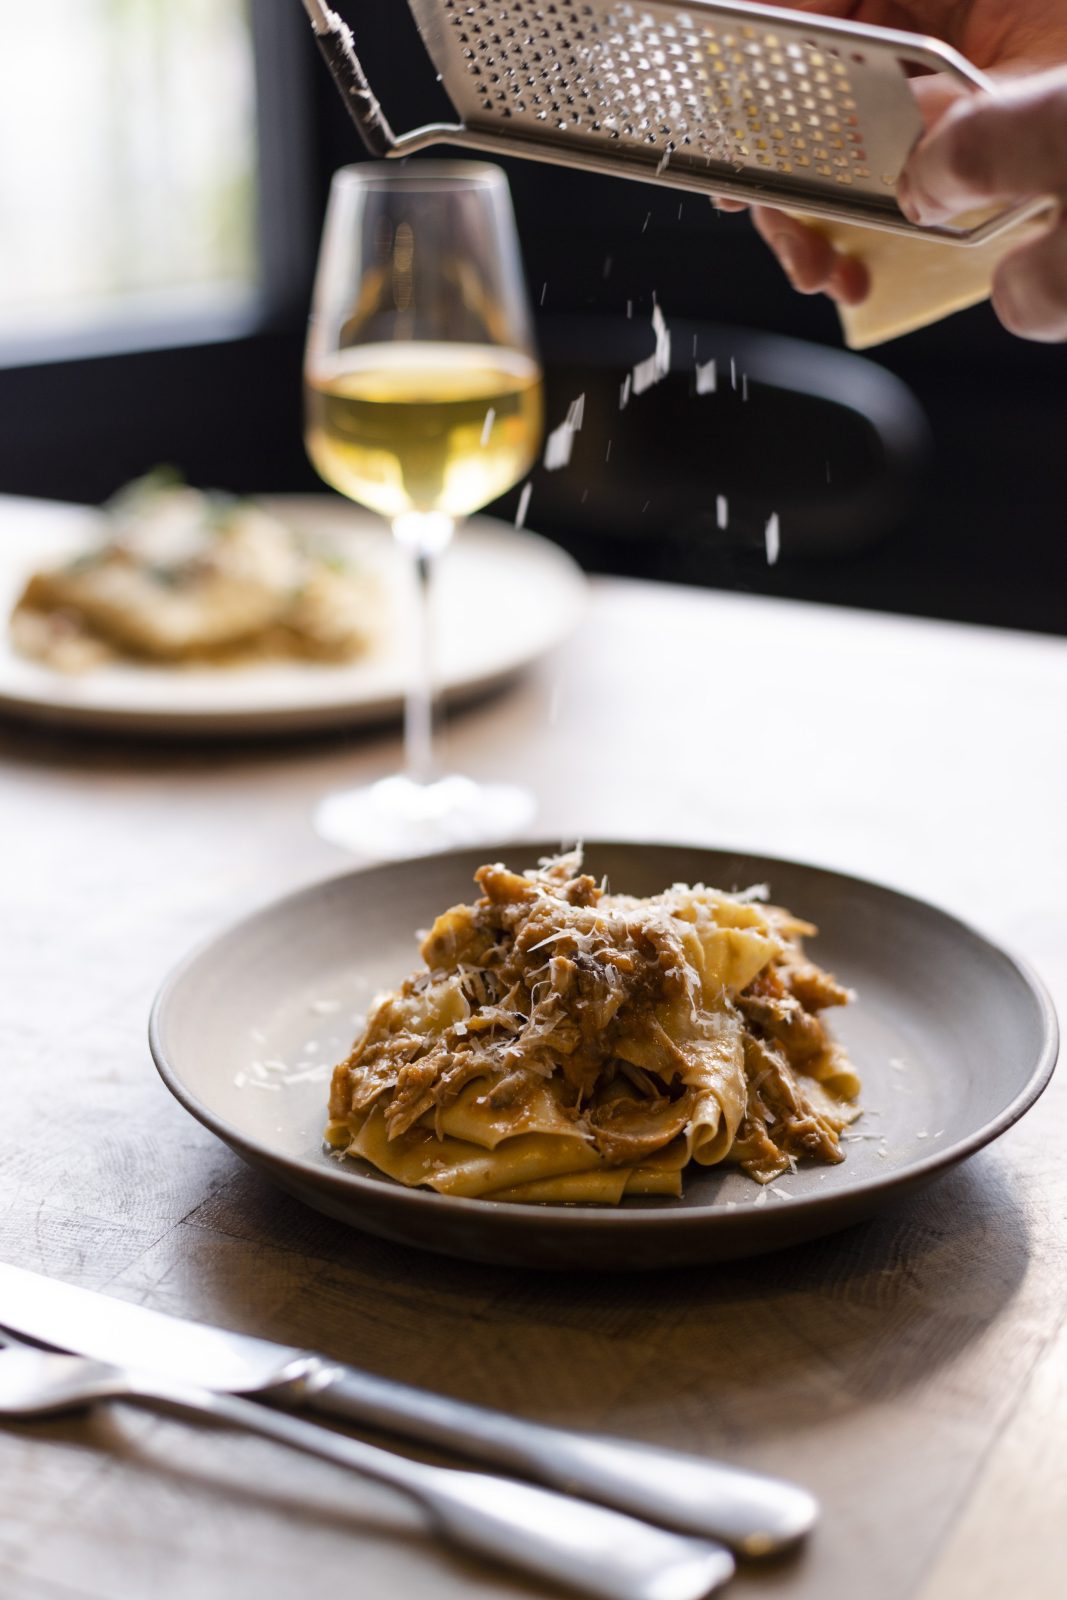 The Creameries ditch tasting menus for new pasta and focaccia concept inspired by Southern Europe, The Manc